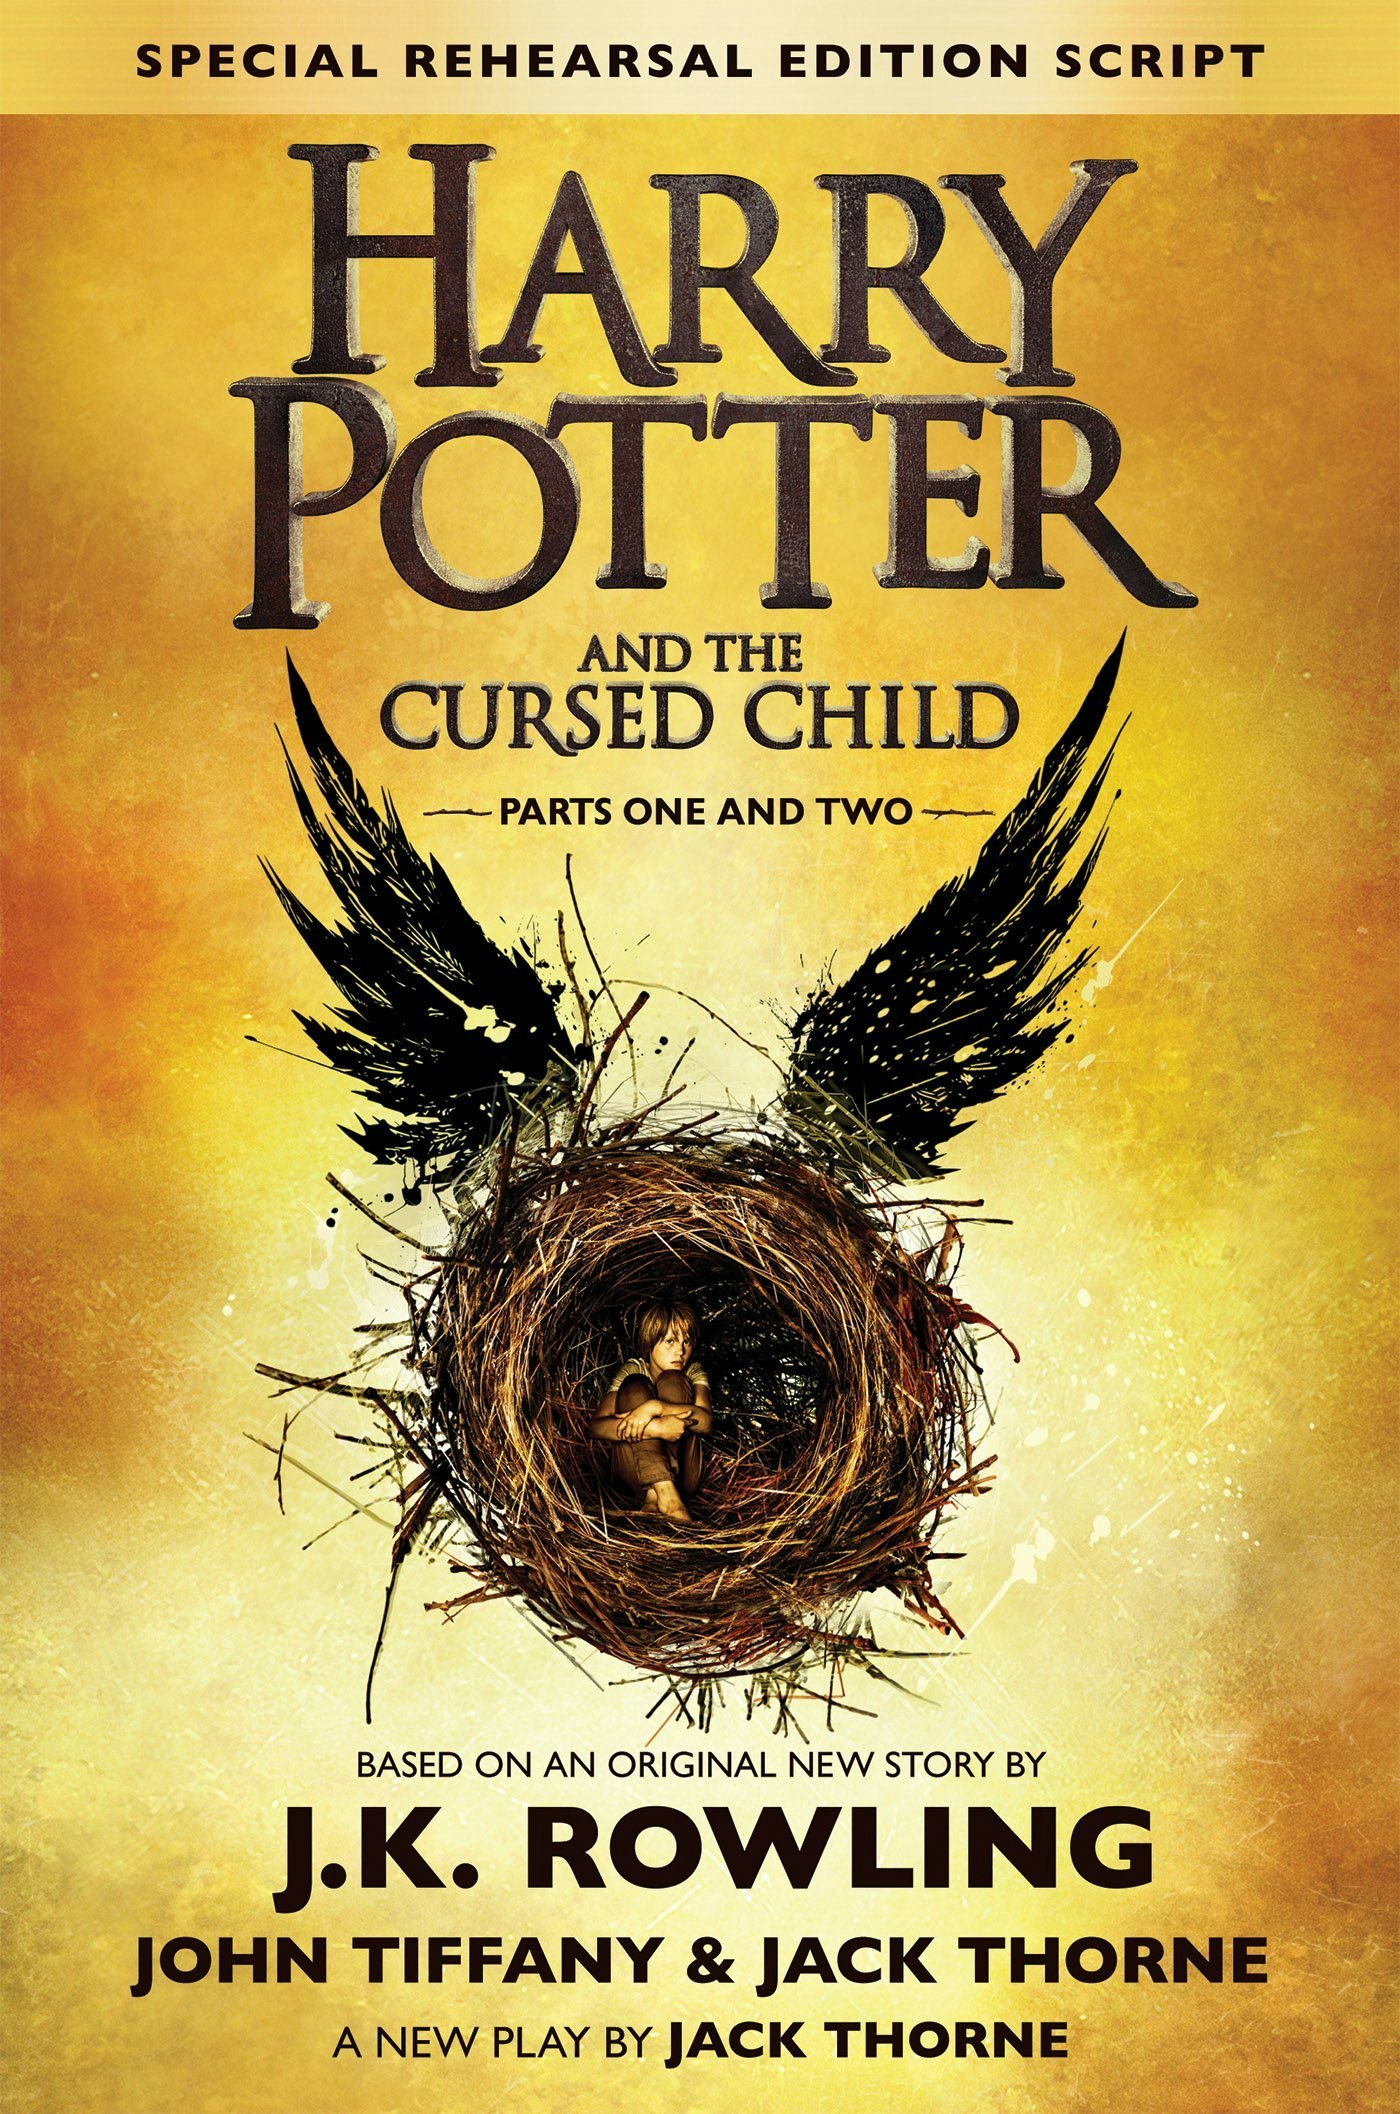 harry potter and the cursed child book how many pages